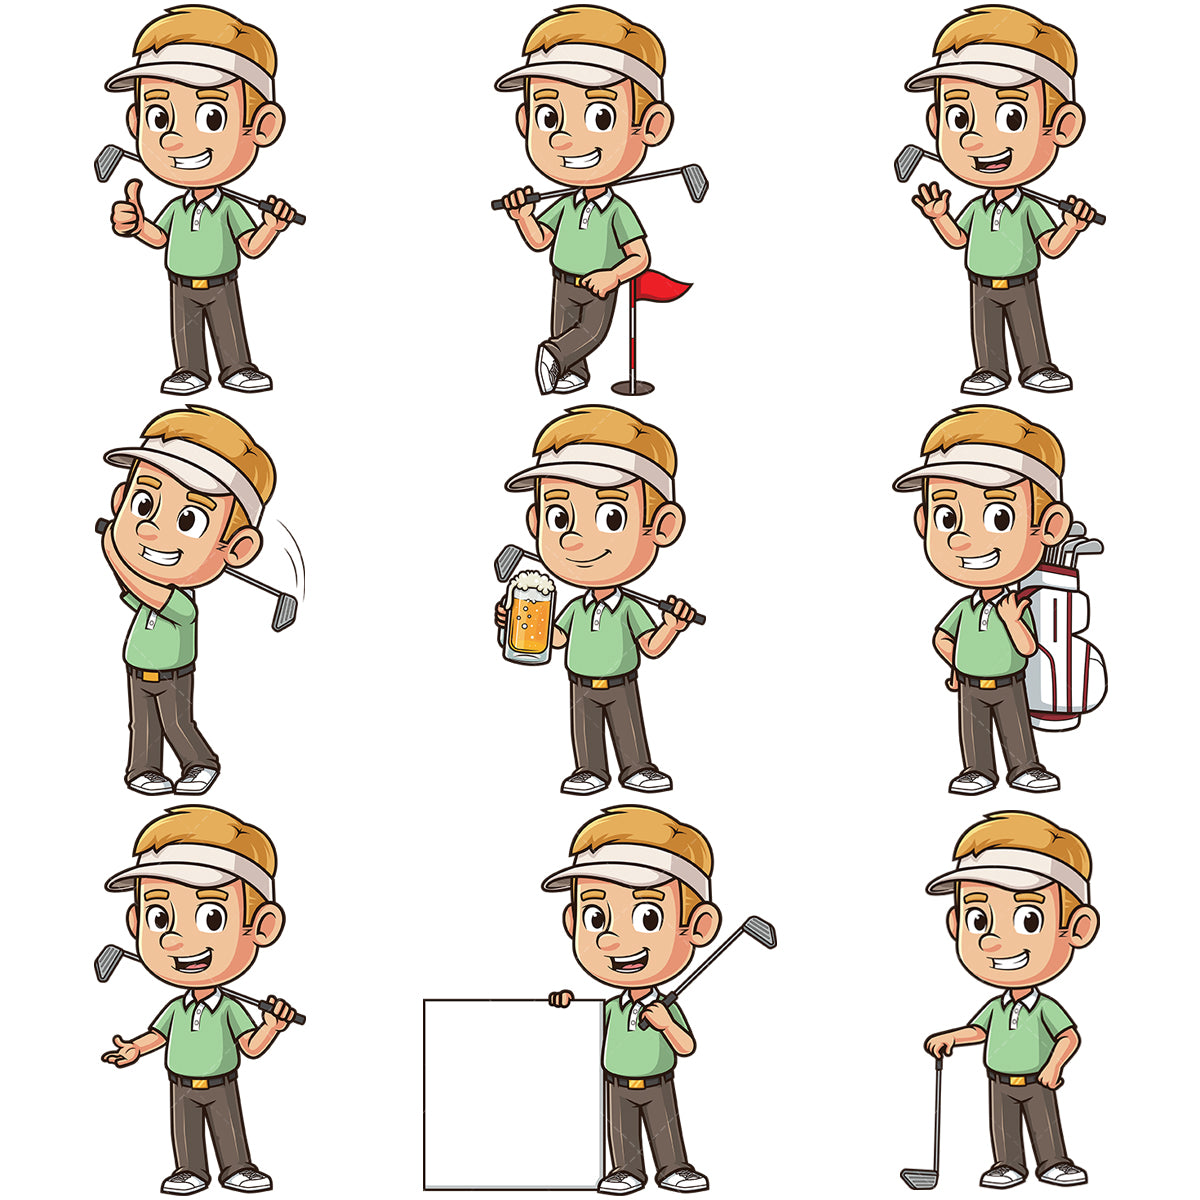 A bundle of 9 royalty-free stock vector illustrations of a caucasian male golfer.